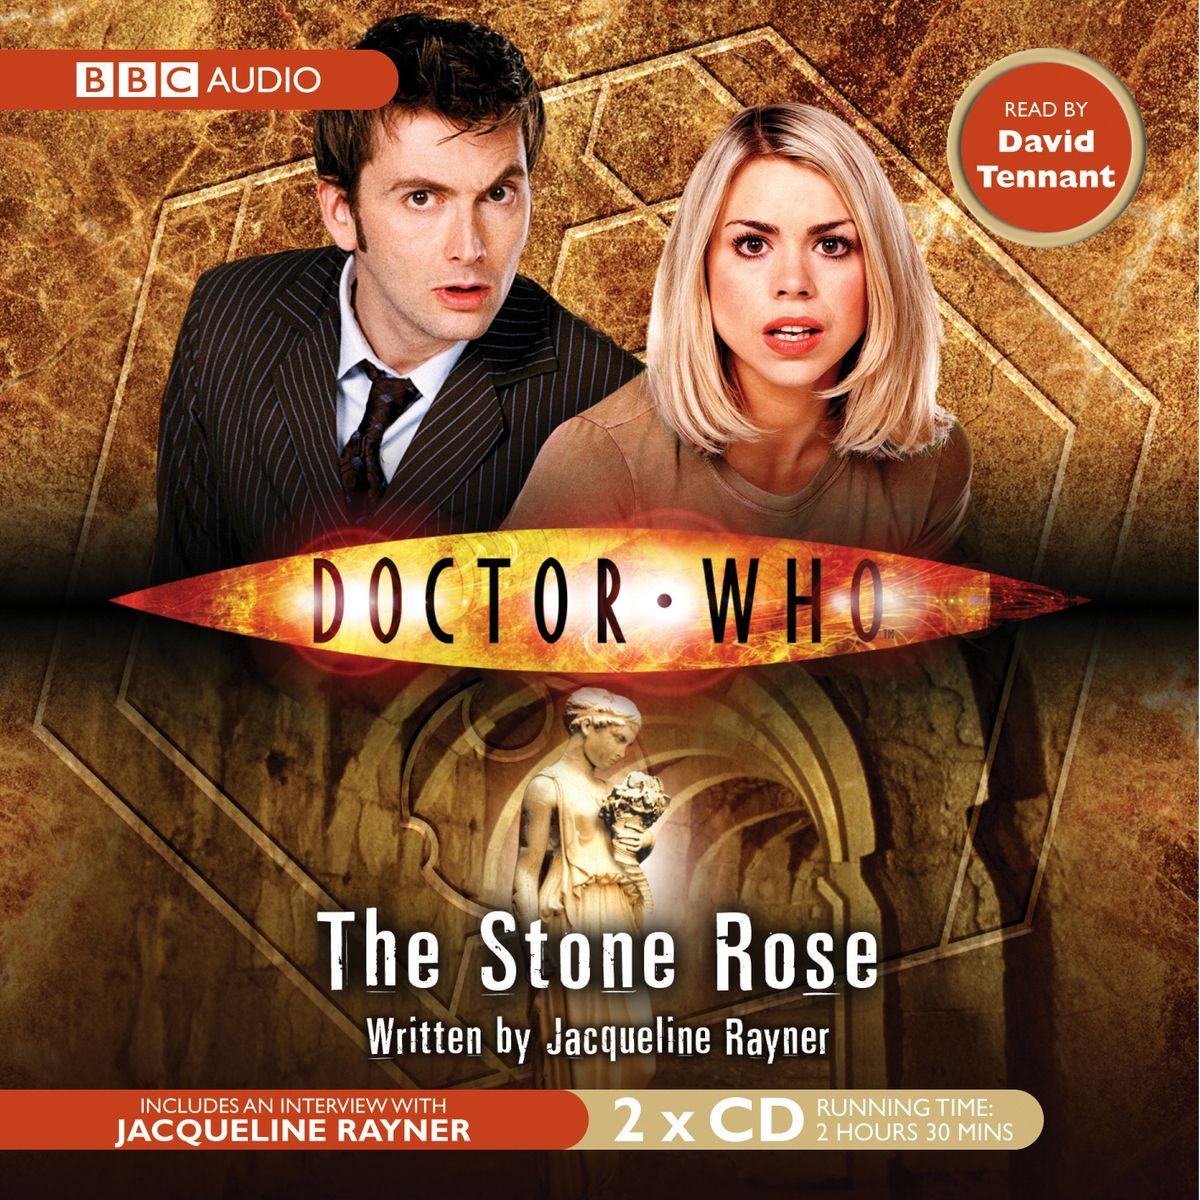 The Stone Rose